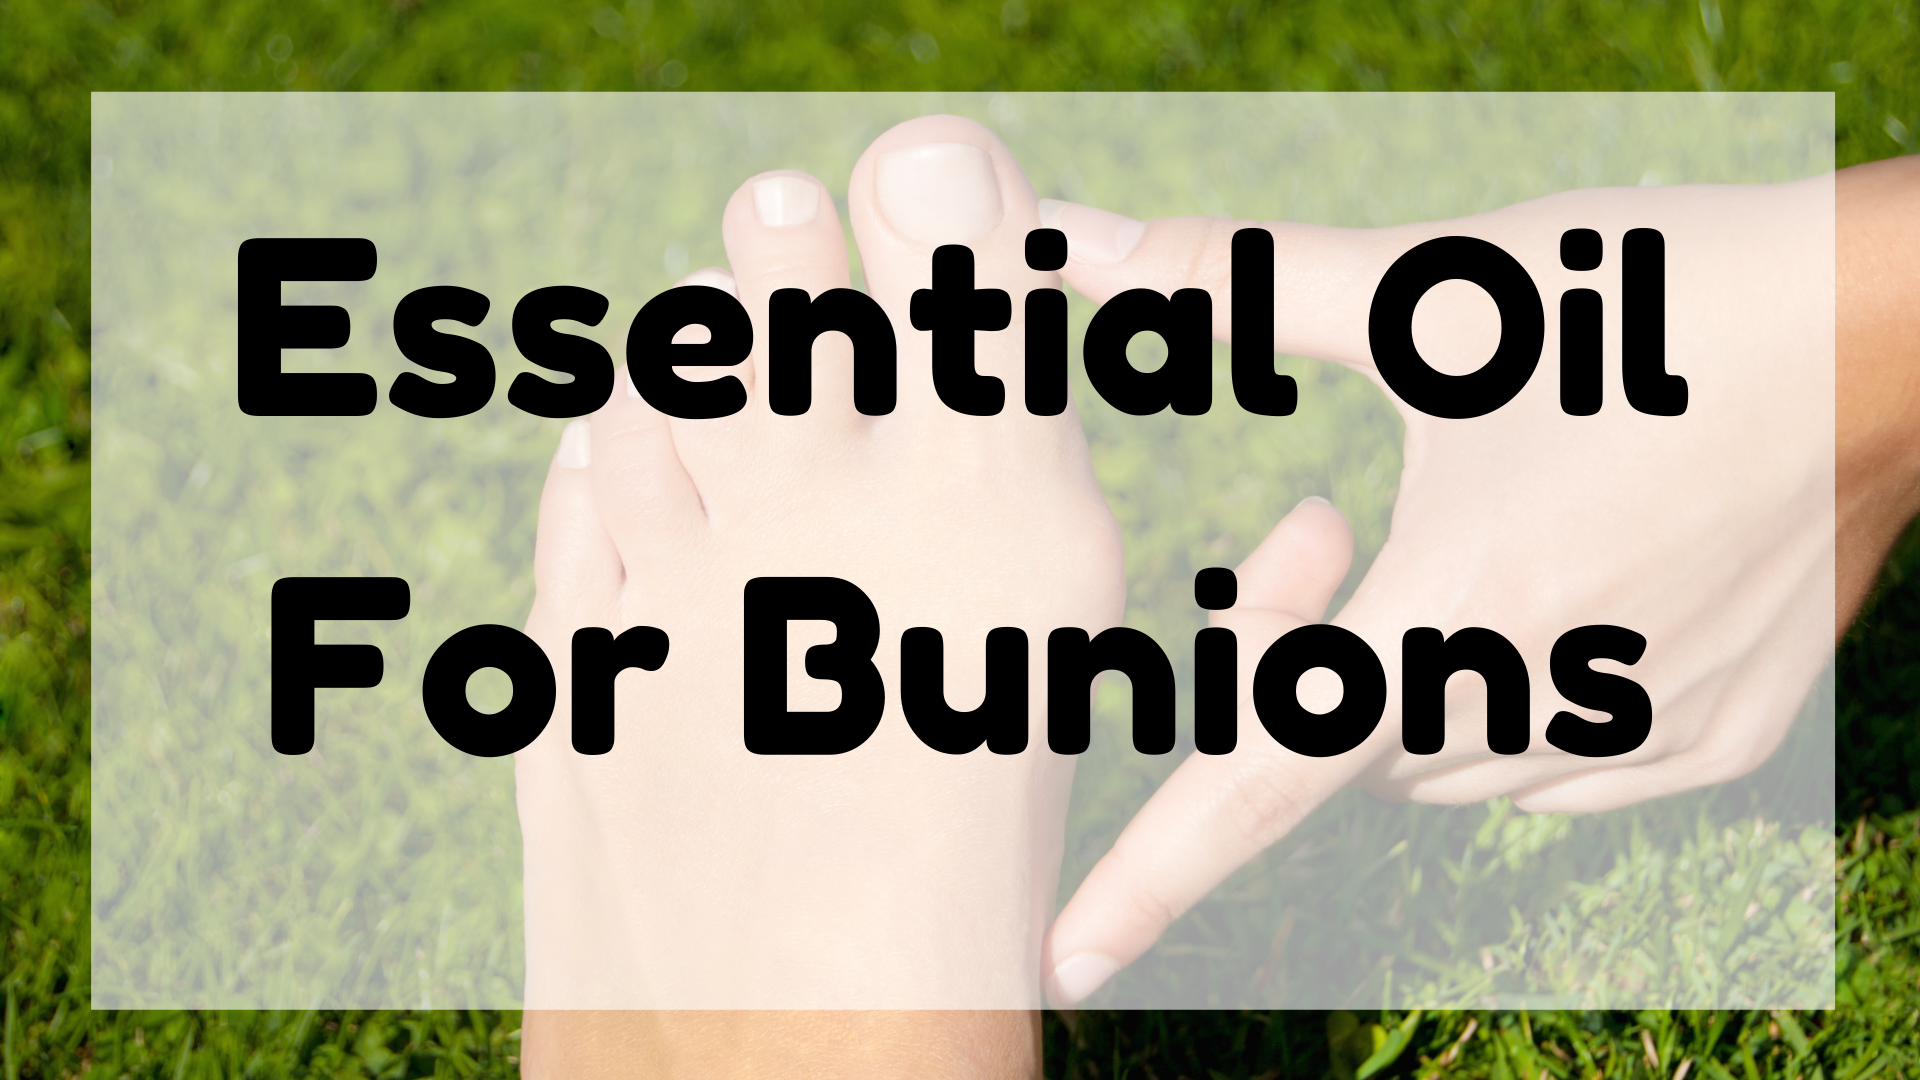 Essential Oil For Bunions